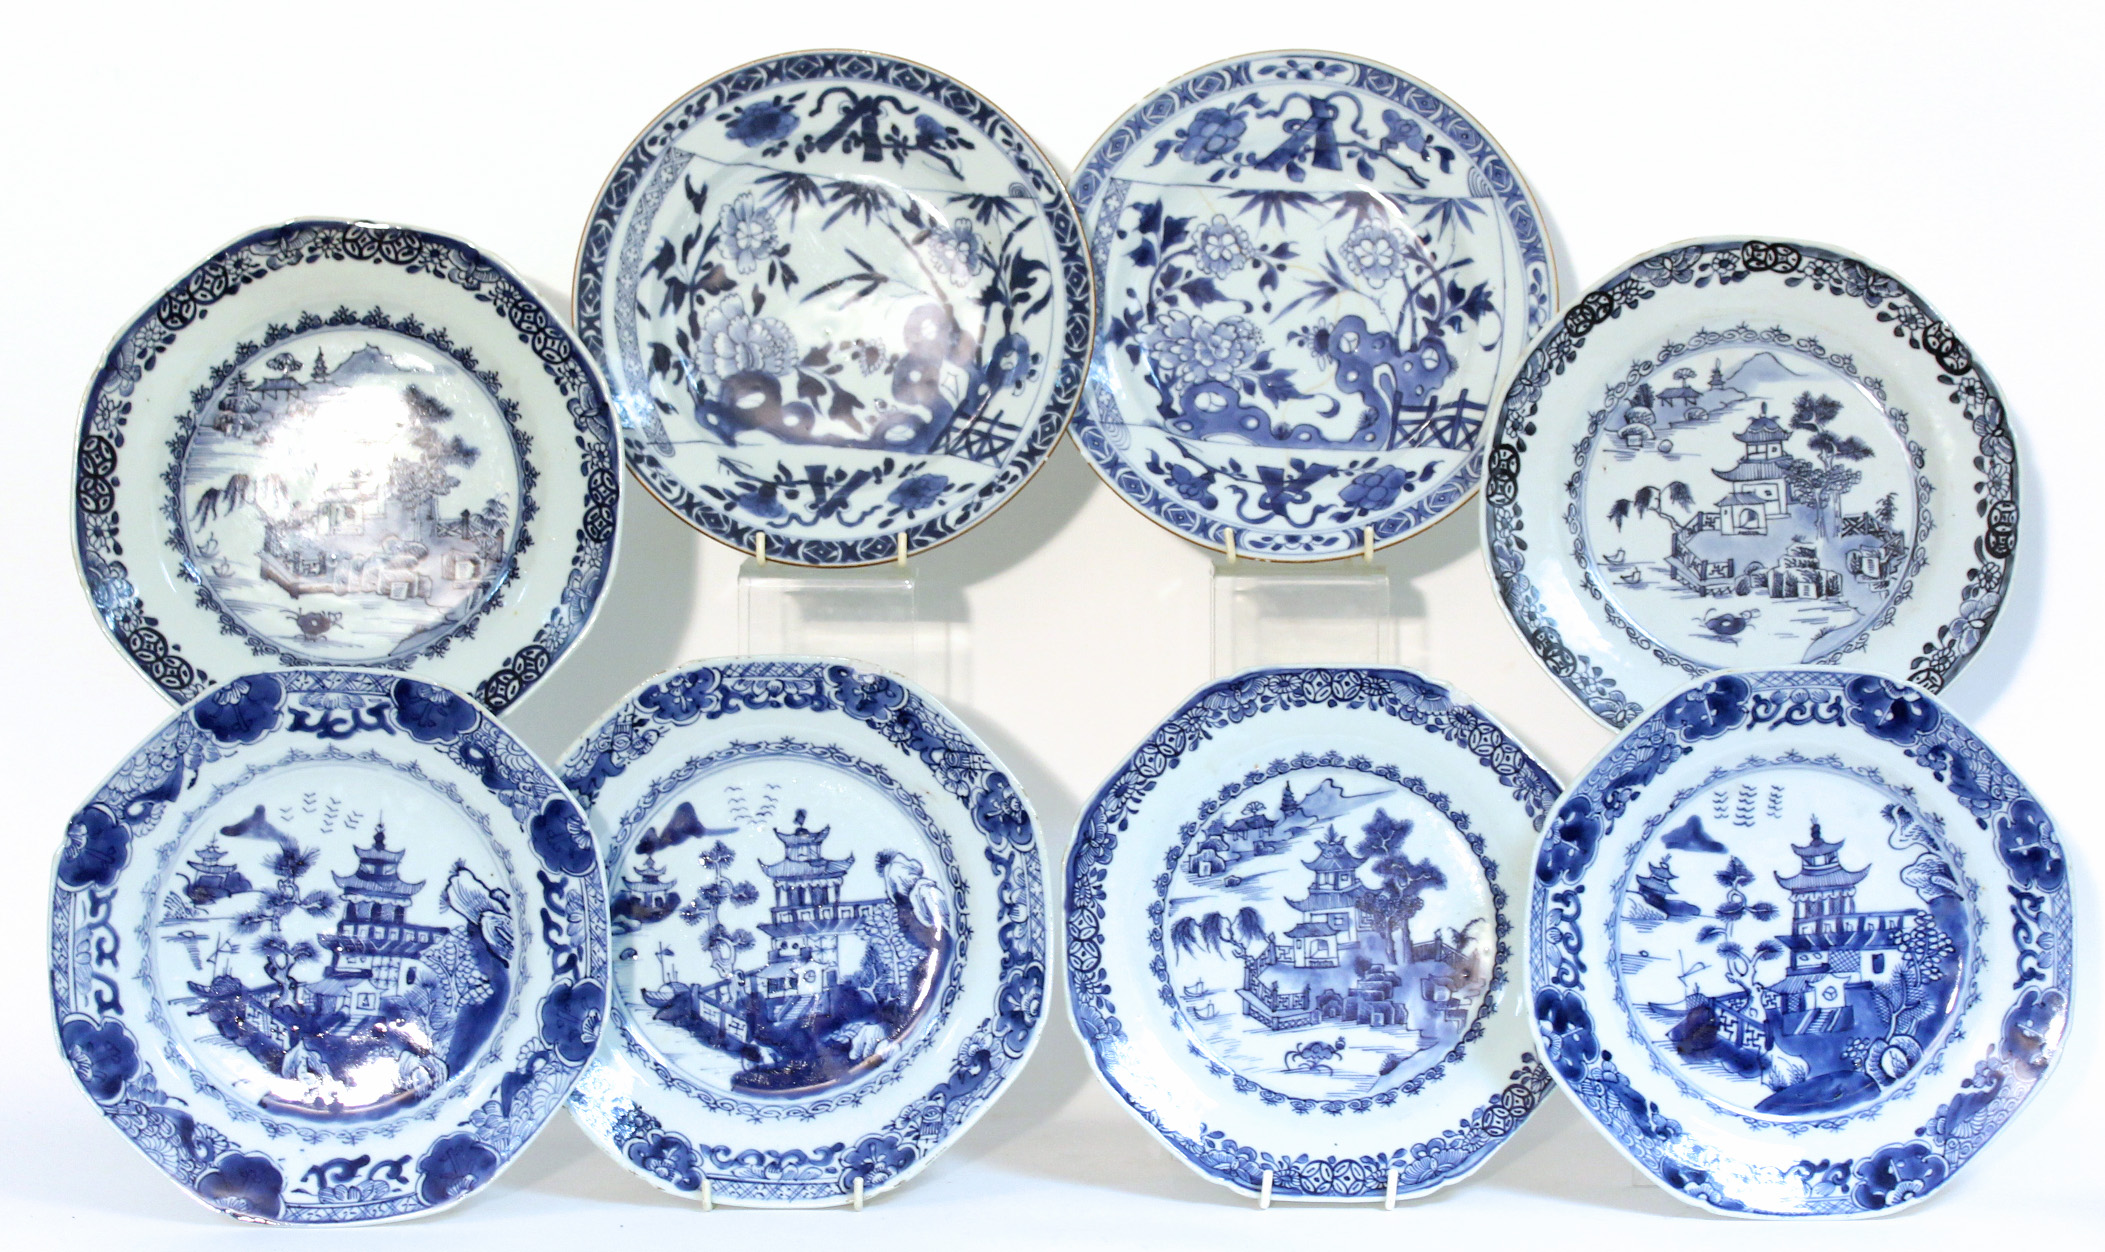 A set of six 18th century Chinese blue-&-white porcelain 9” octagonal plates with formal landscape